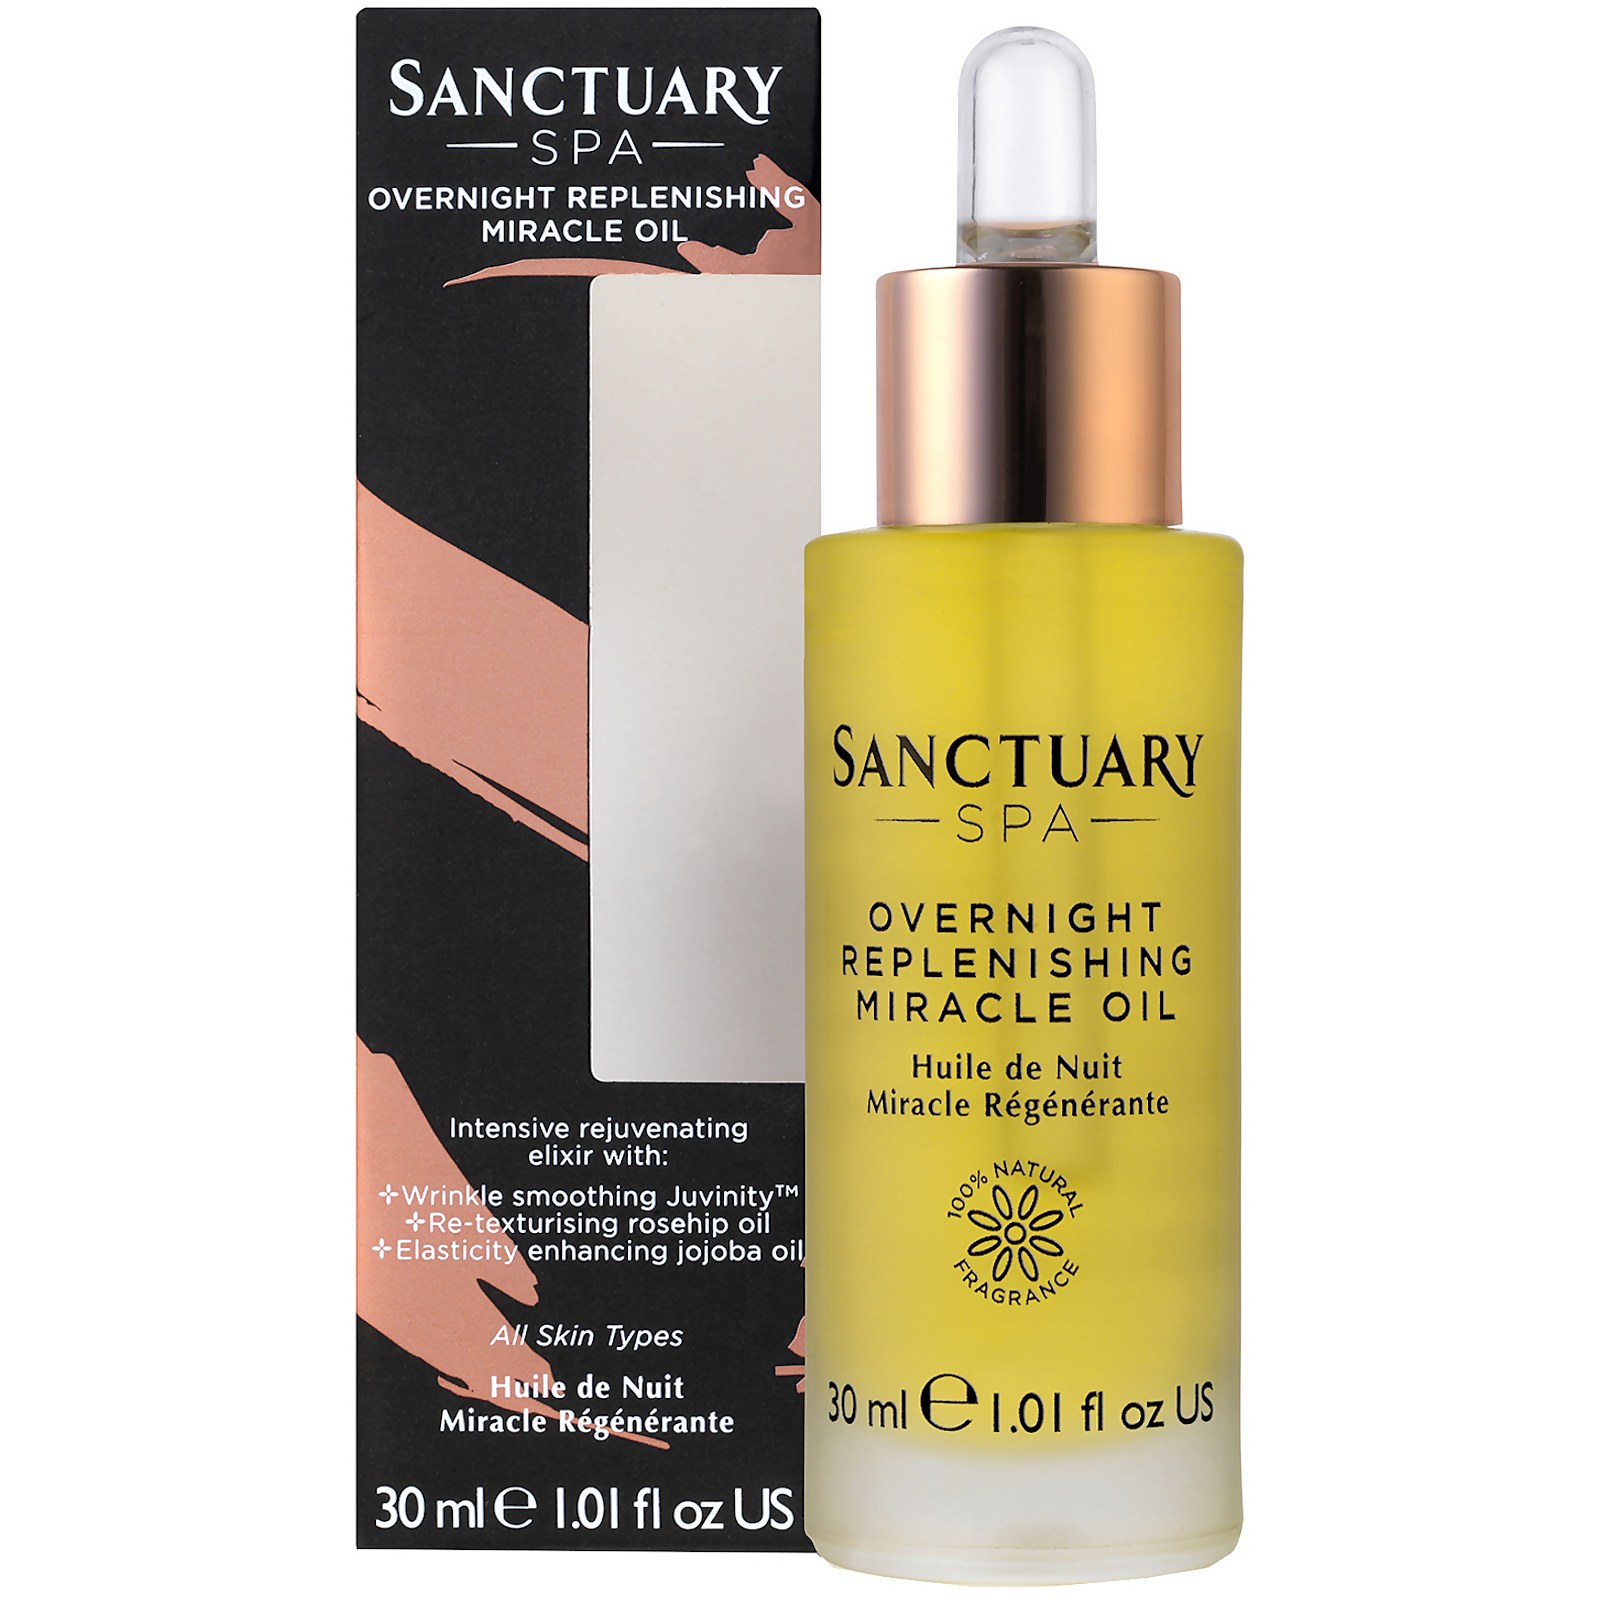 Image of Sanctuary Spa Overnight Replenishing Miracle Oil 30ml